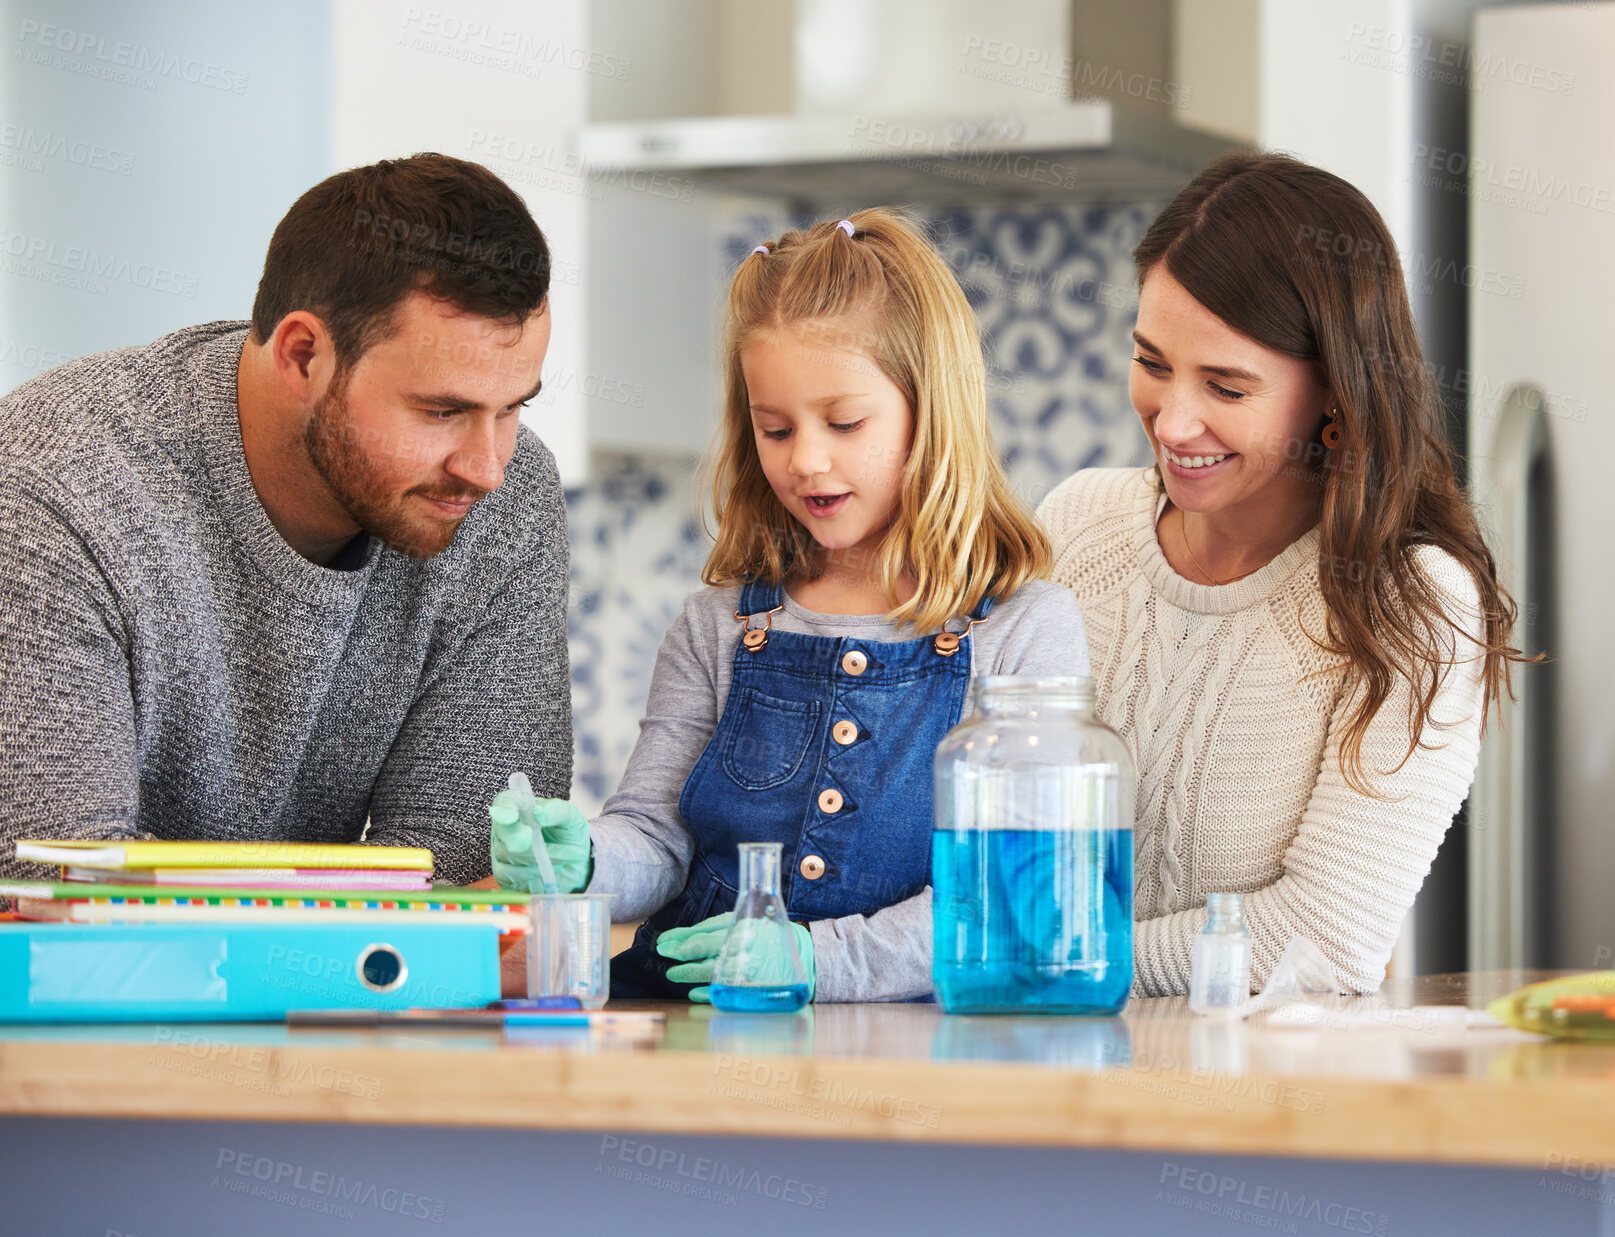 Buy stock photo Shot of a family completing science experiments at home